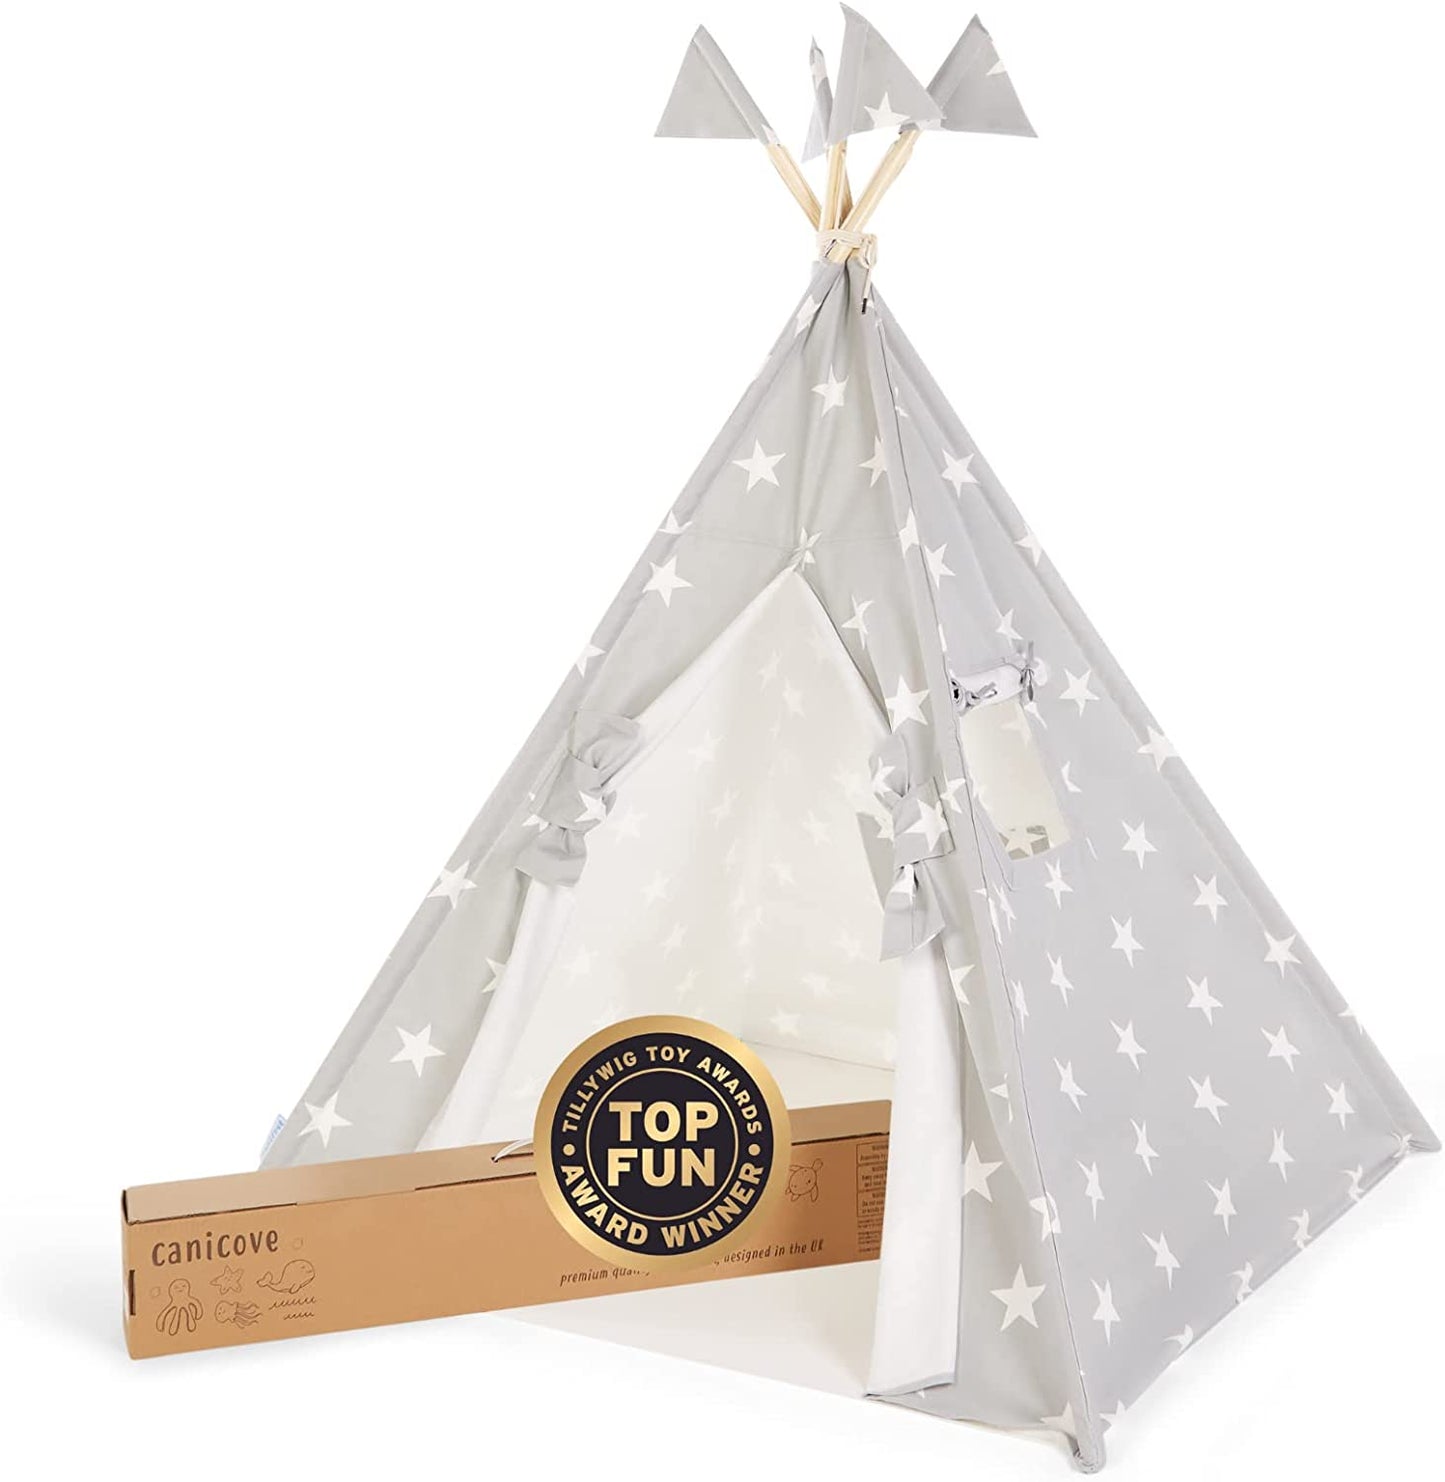 TotsAhoy Children Teepees Grey stars Canicove Teepee Tent for Kids